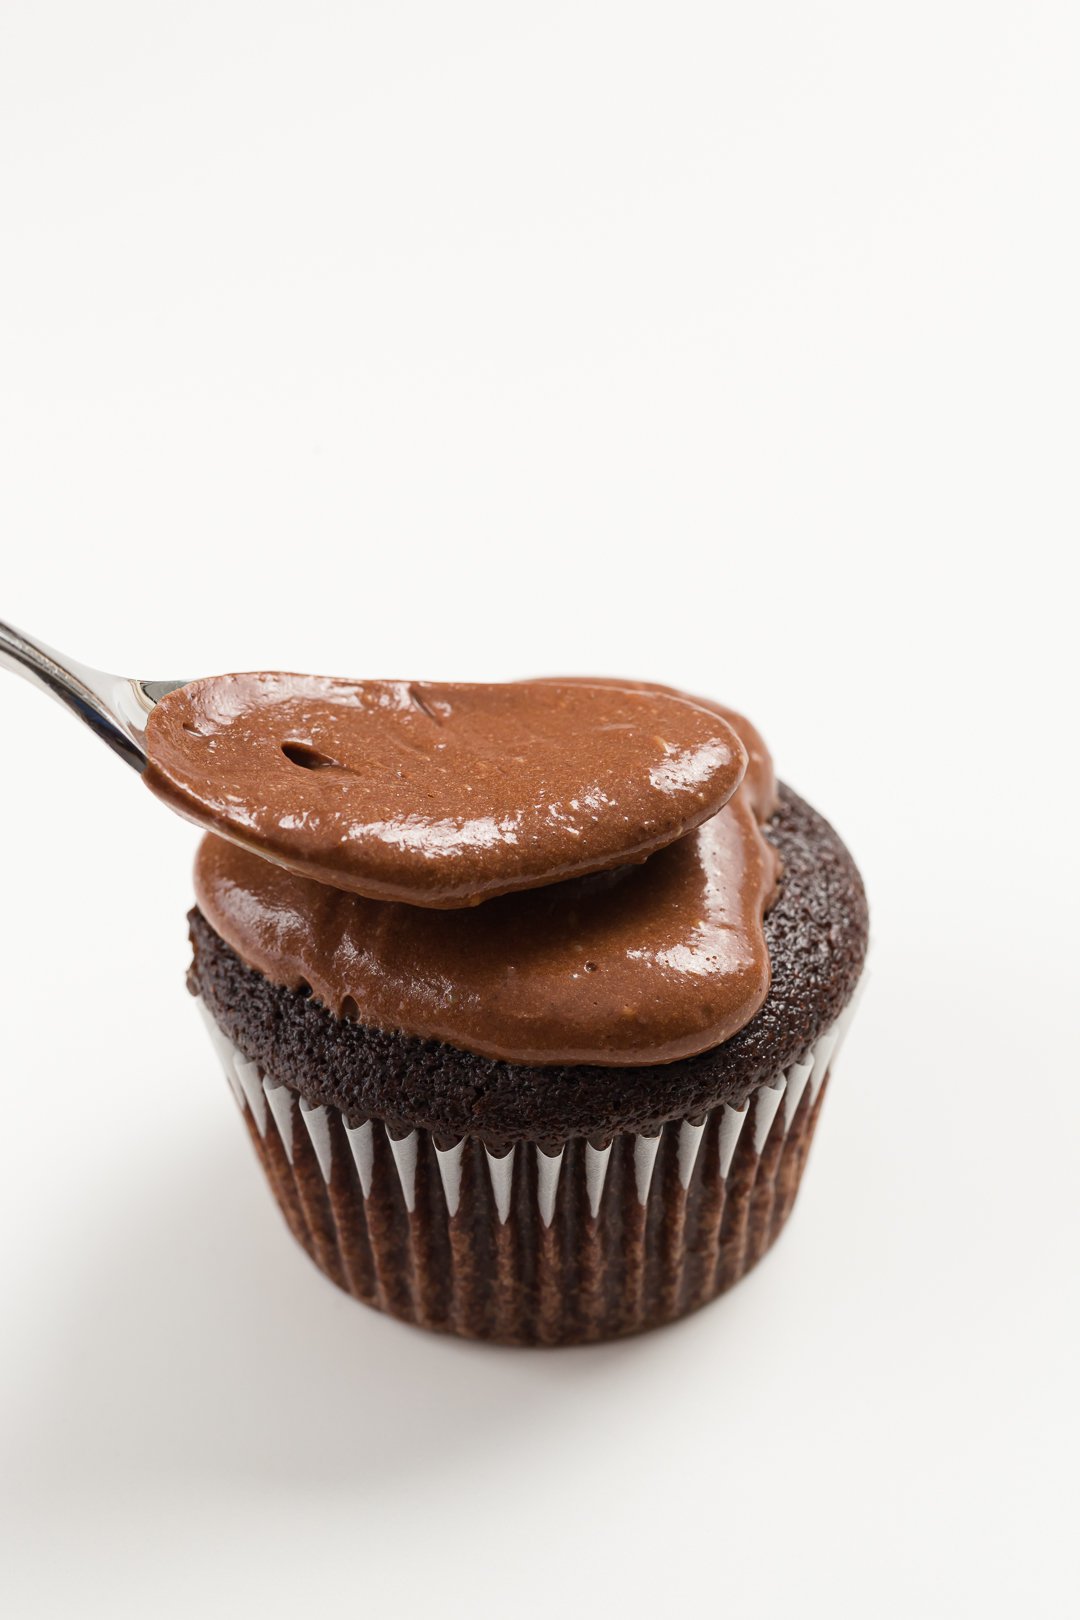 spreading ganache over the top of a filled cupcake